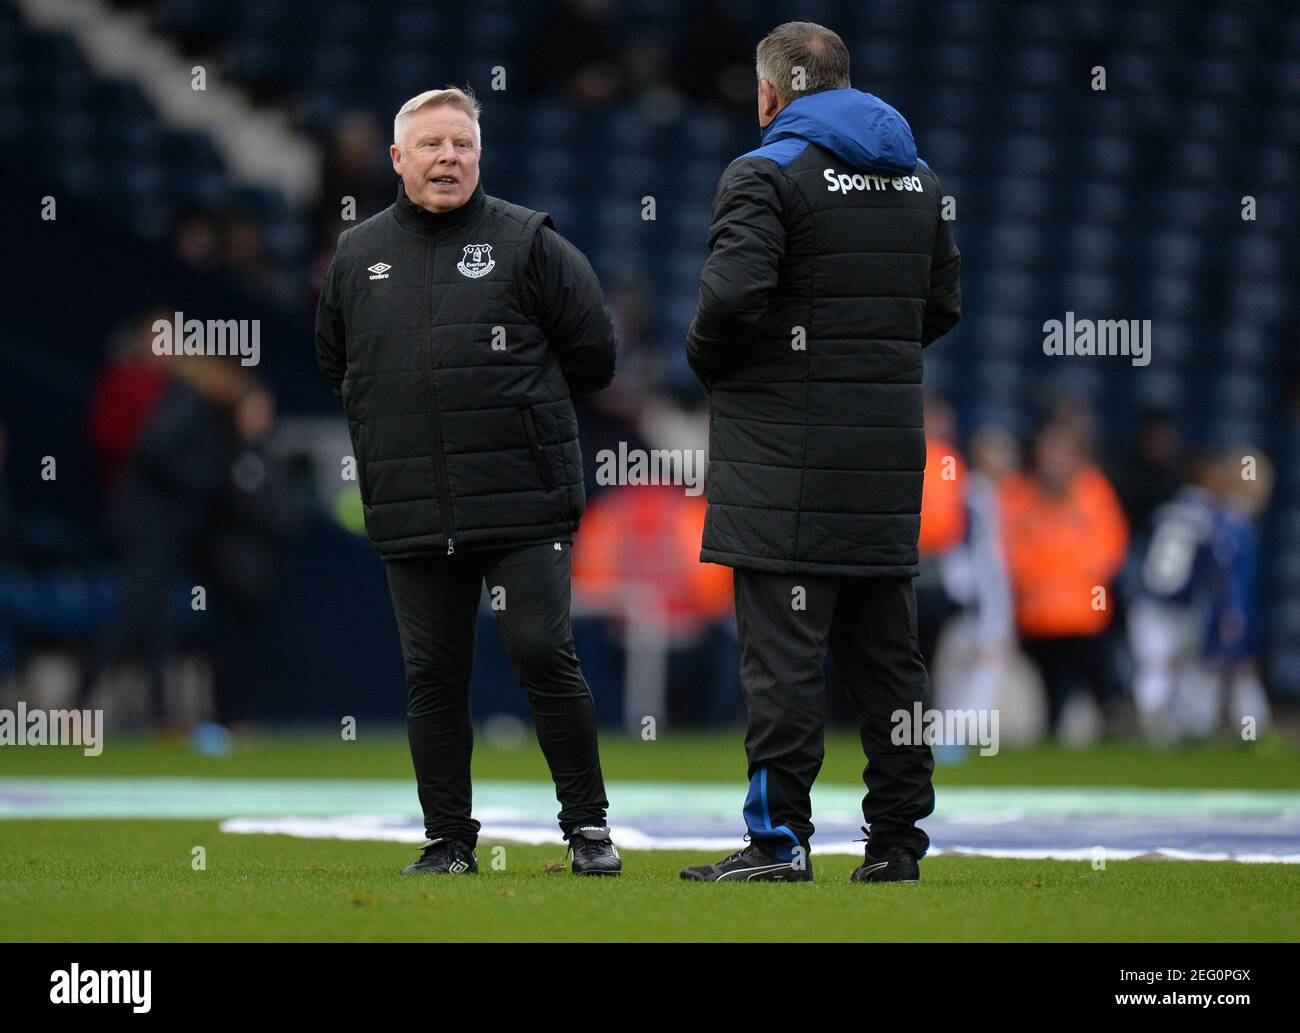 Soccer Football - Premier League - West Bromwich Albion vs Everton - The Hawthorns, West Bromwich, Britain - December 26, 2017   Everton assistant manager Sammy Lee before the match   REUTERS/Peter Powell    EDITORIAL USE ONLY. No use with unauthorized audio, video, data, fixture lists, club/league logos or "live" services. Online in-match use limited to 75 images, no video emulation. No use in betting, games or single club/league/player publications.  Please contact your account representative for further details. Stock Photo